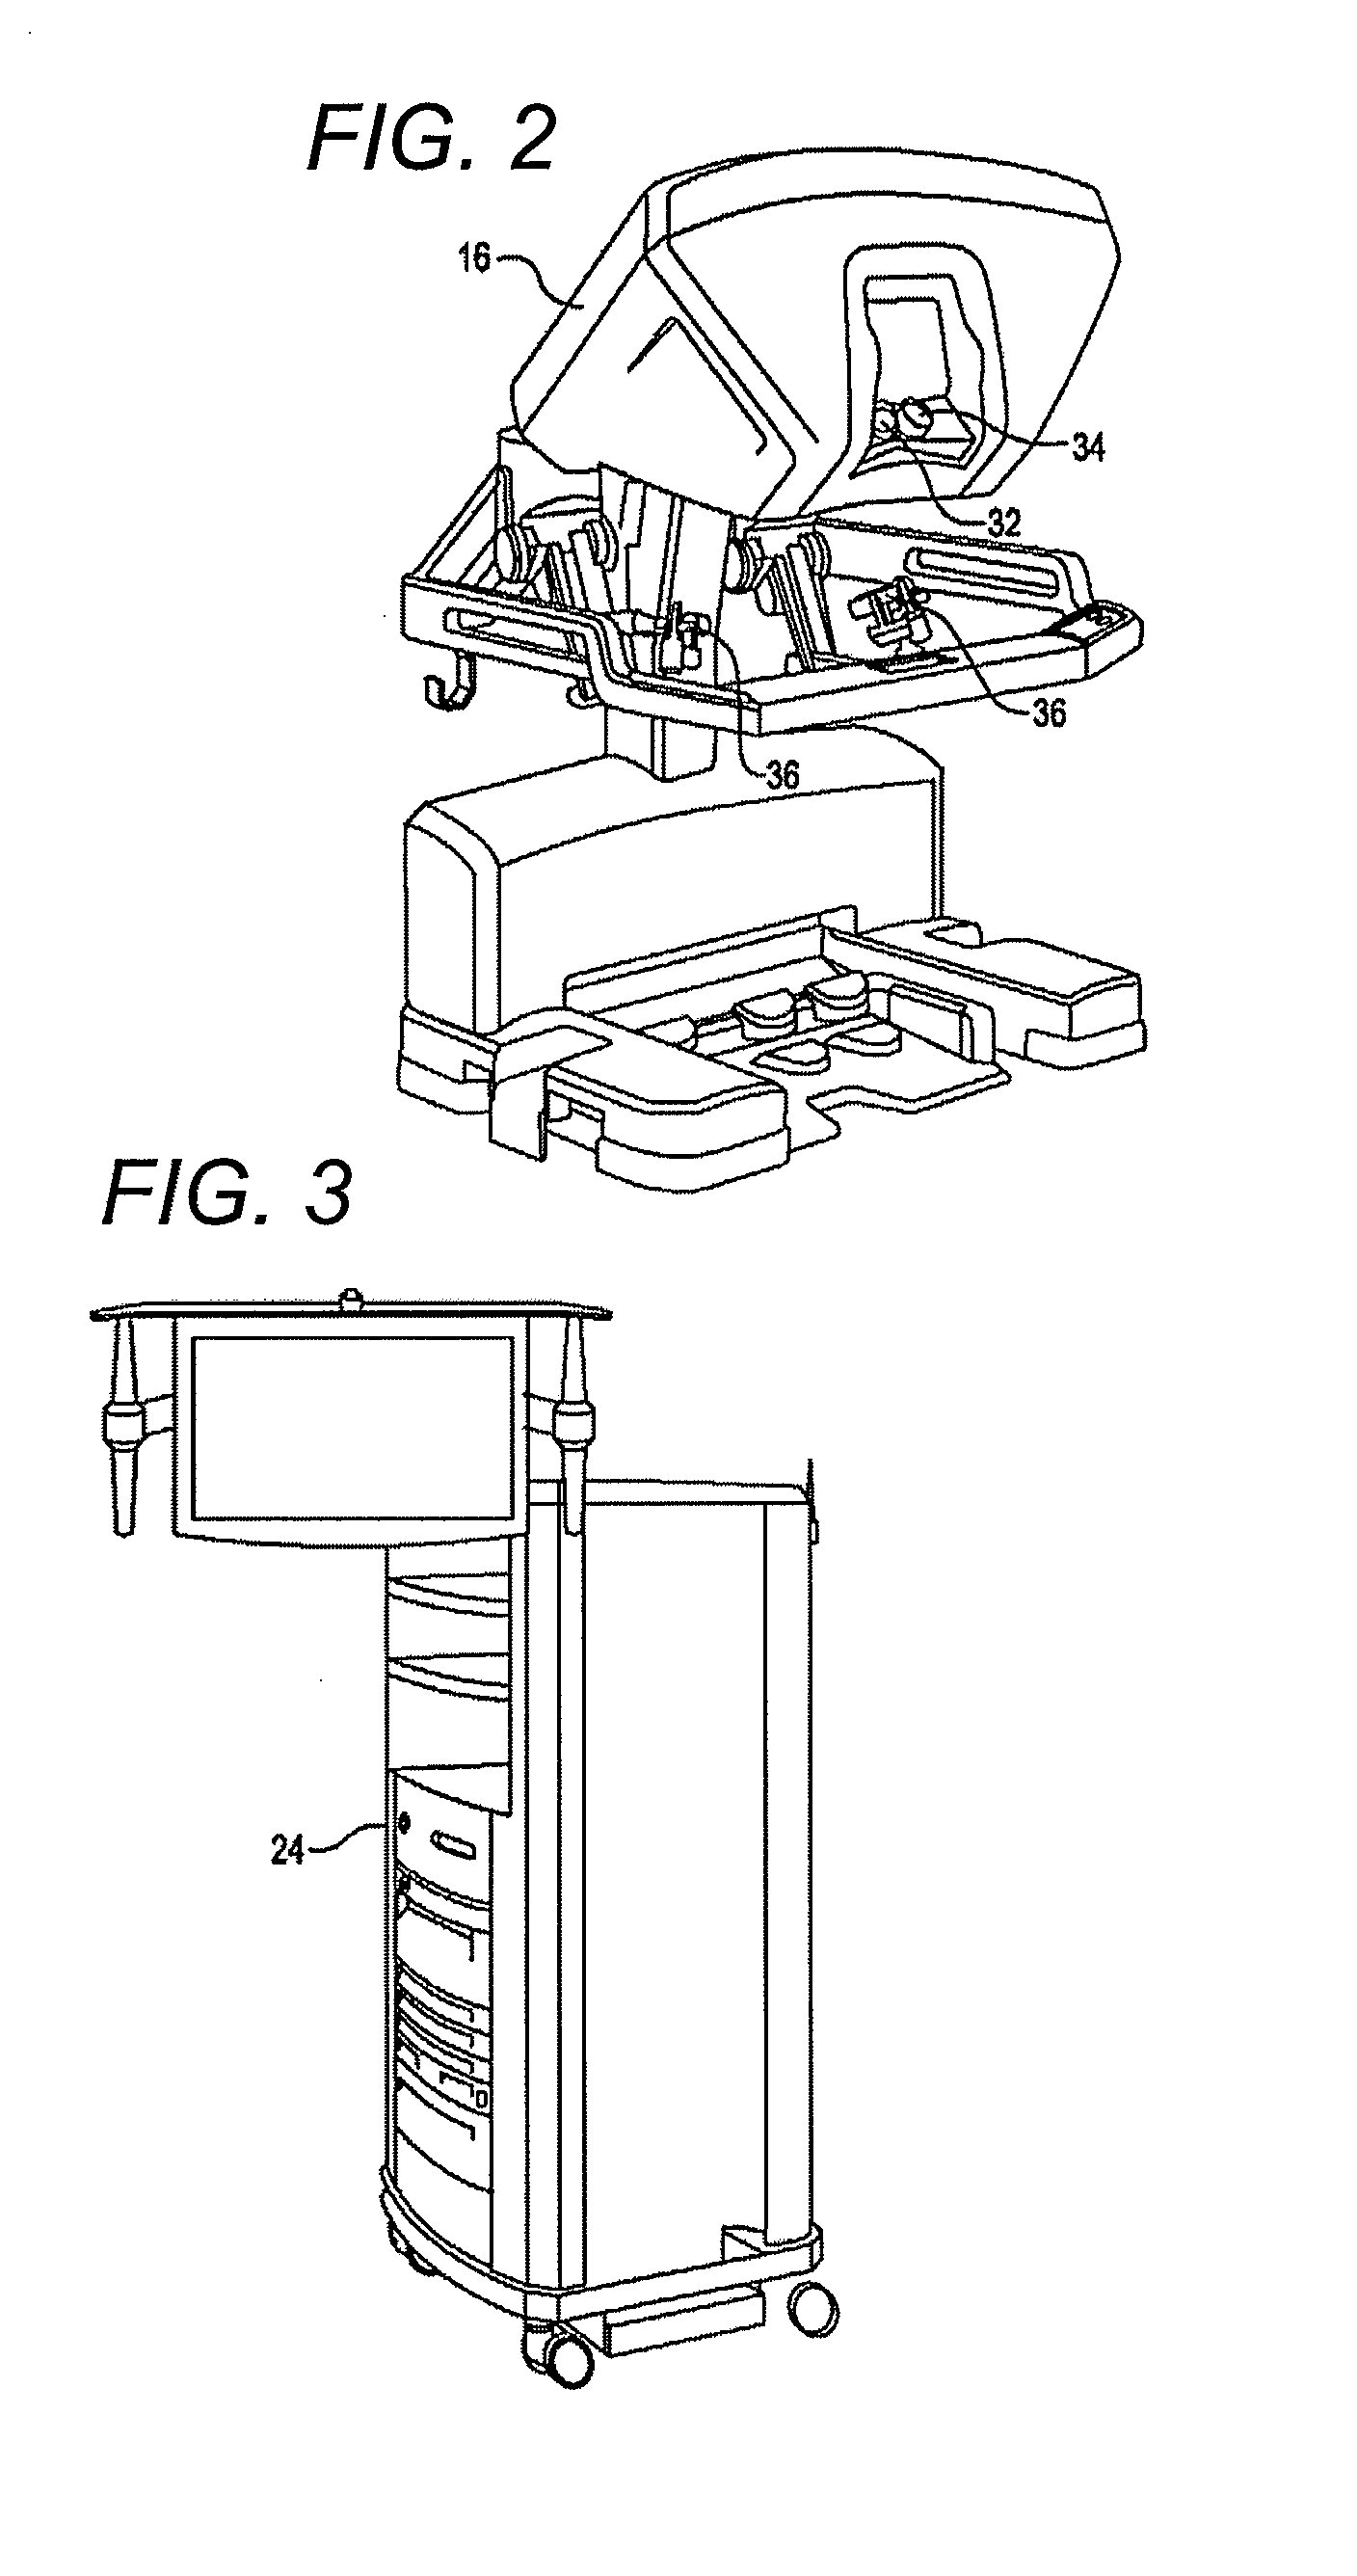 Positions for Multiple Surgical Mounting Platform Rotation Clutch Buttons